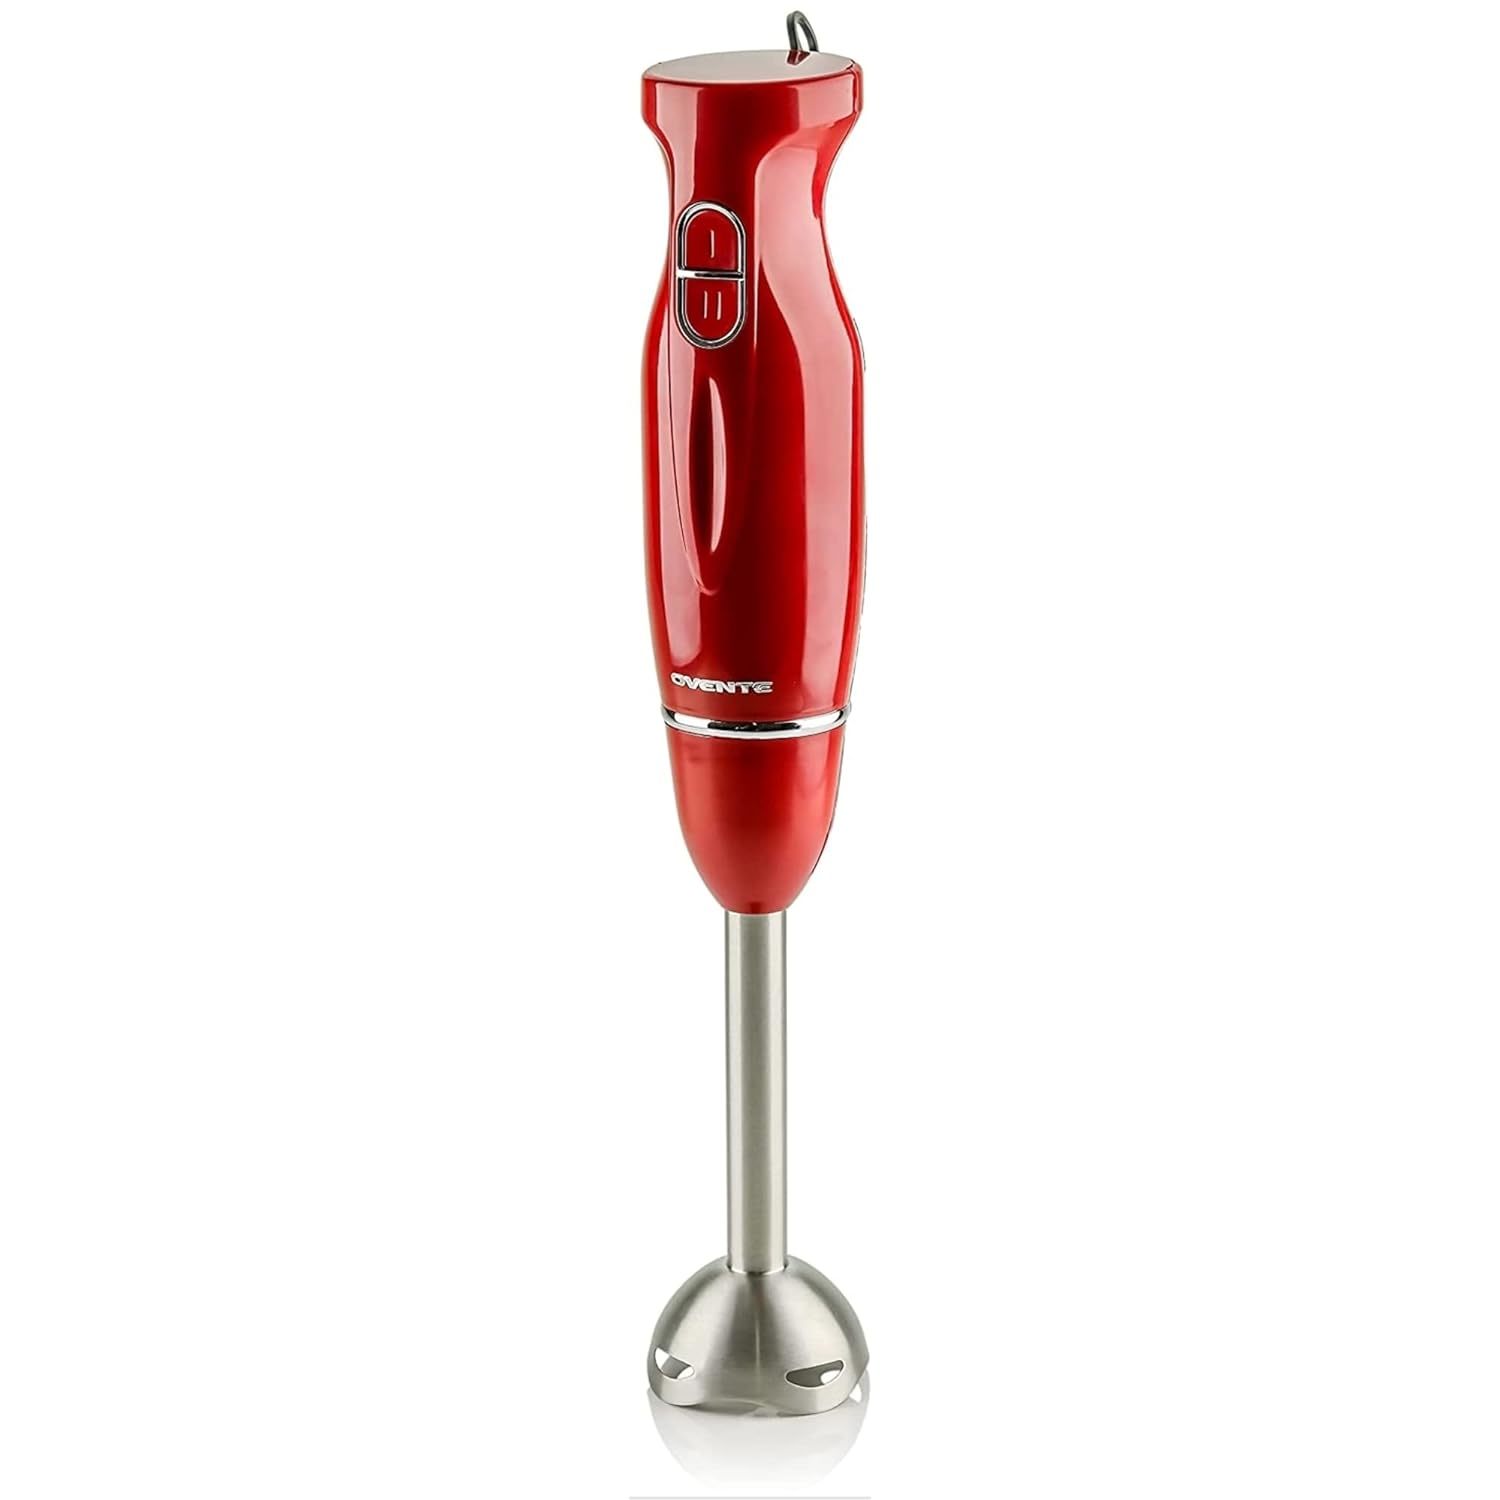 Ovente Electric Immersion Hand Blender 300 Watt 2 Mixing Speed with Stainless St - $23.99